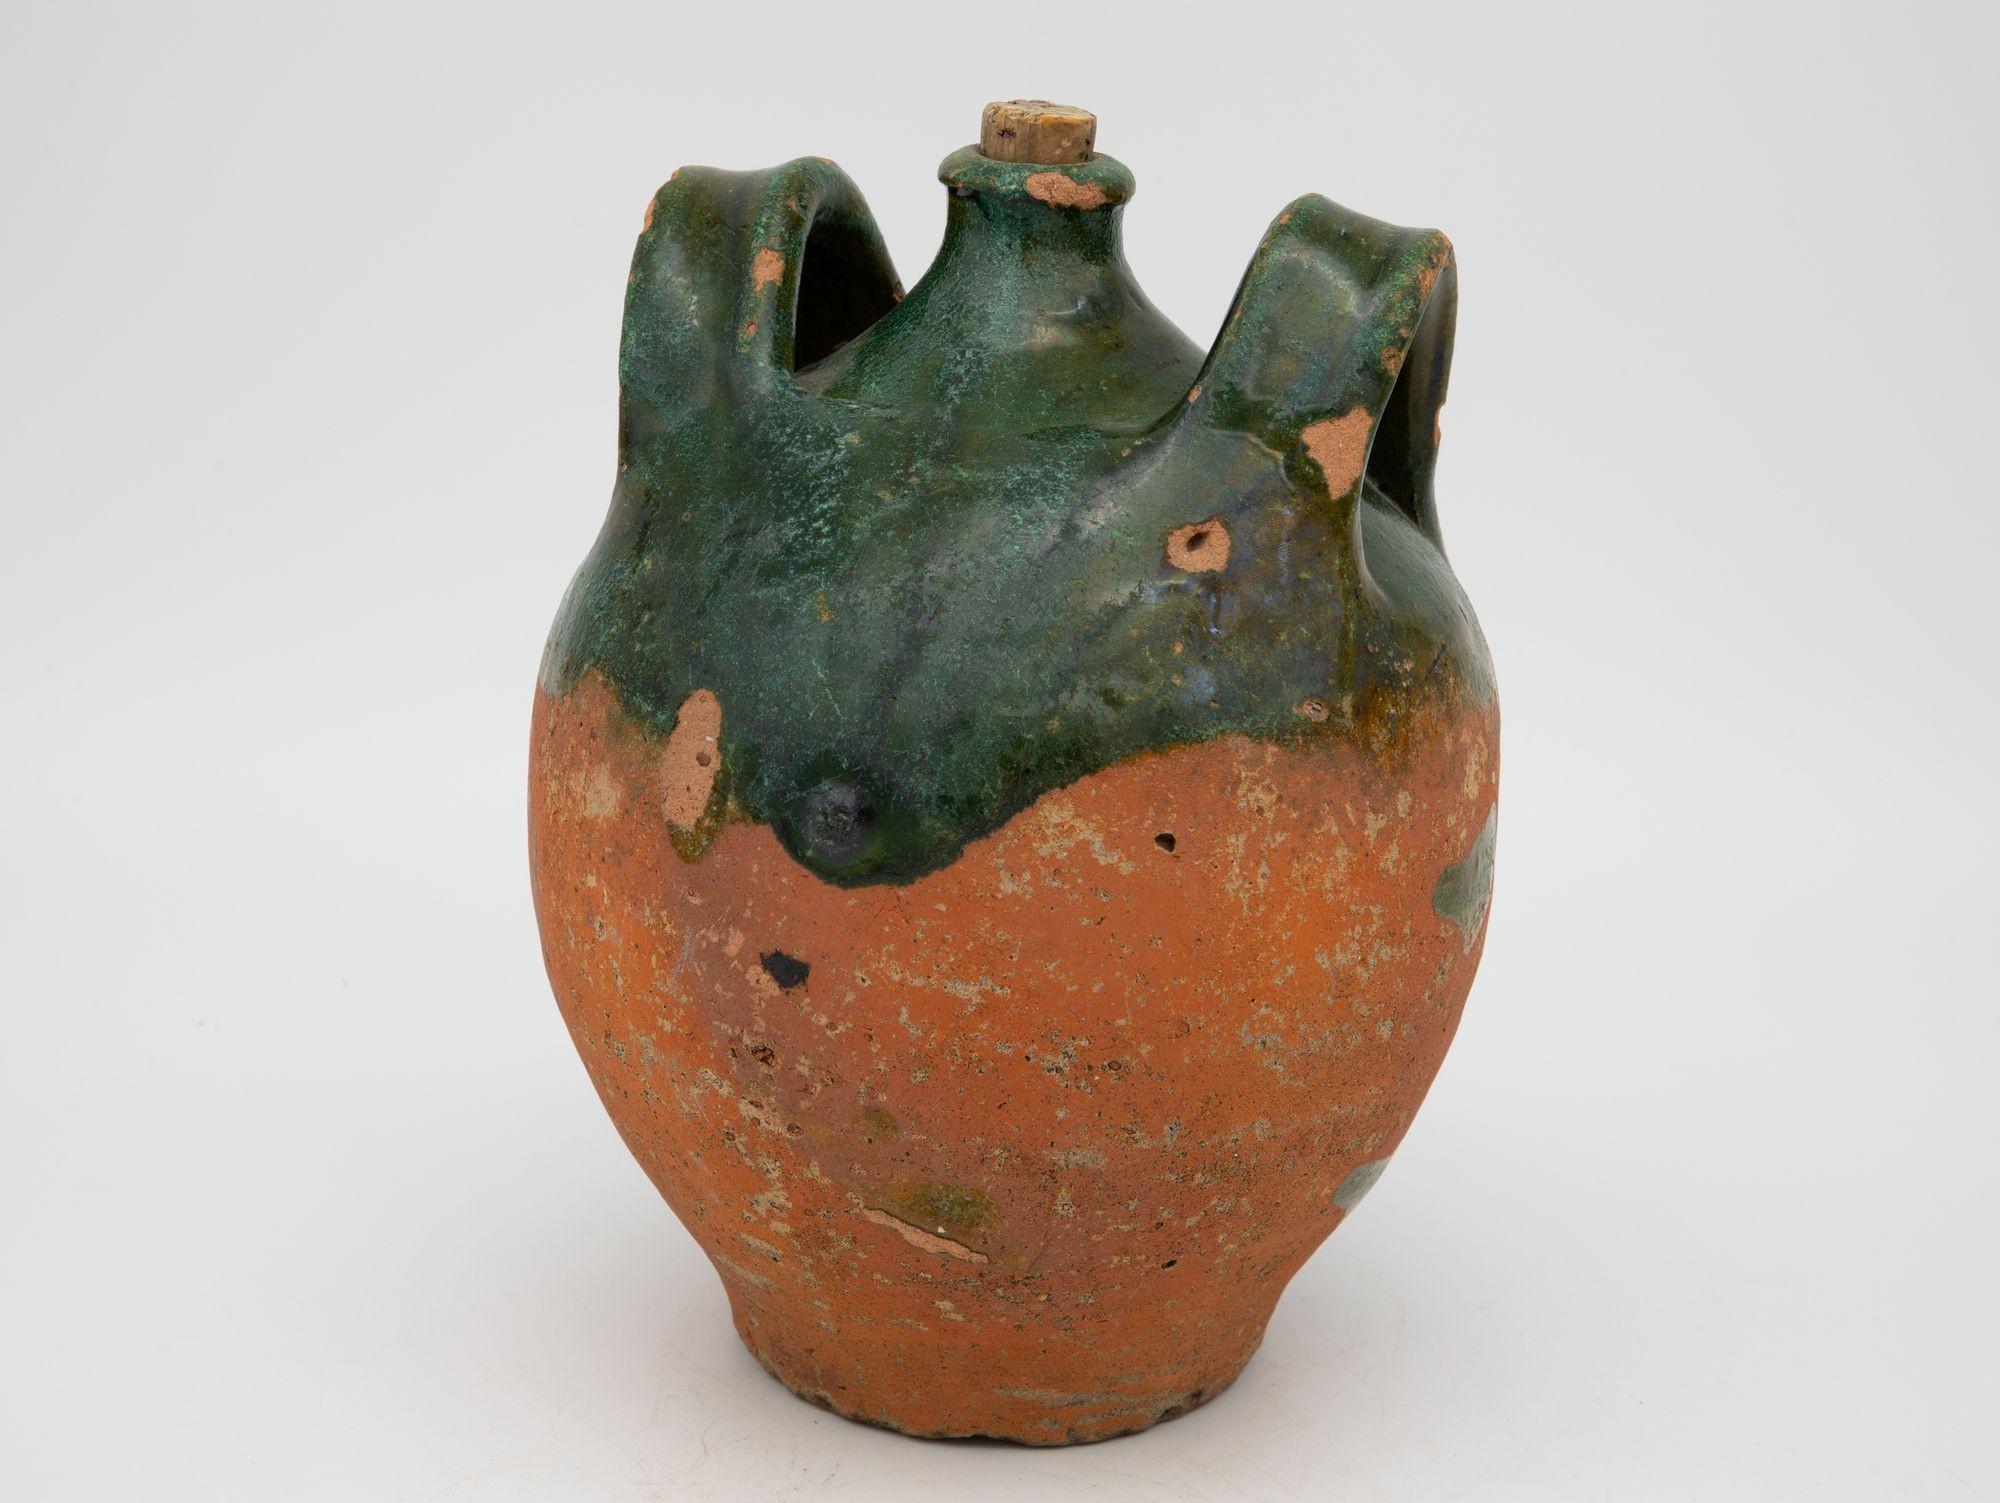 A late 19th century terracotta confit pot from Southwest France. The pot has its original cork and shows two handles with a traditional green glaze. Wear consistent for age and use.0